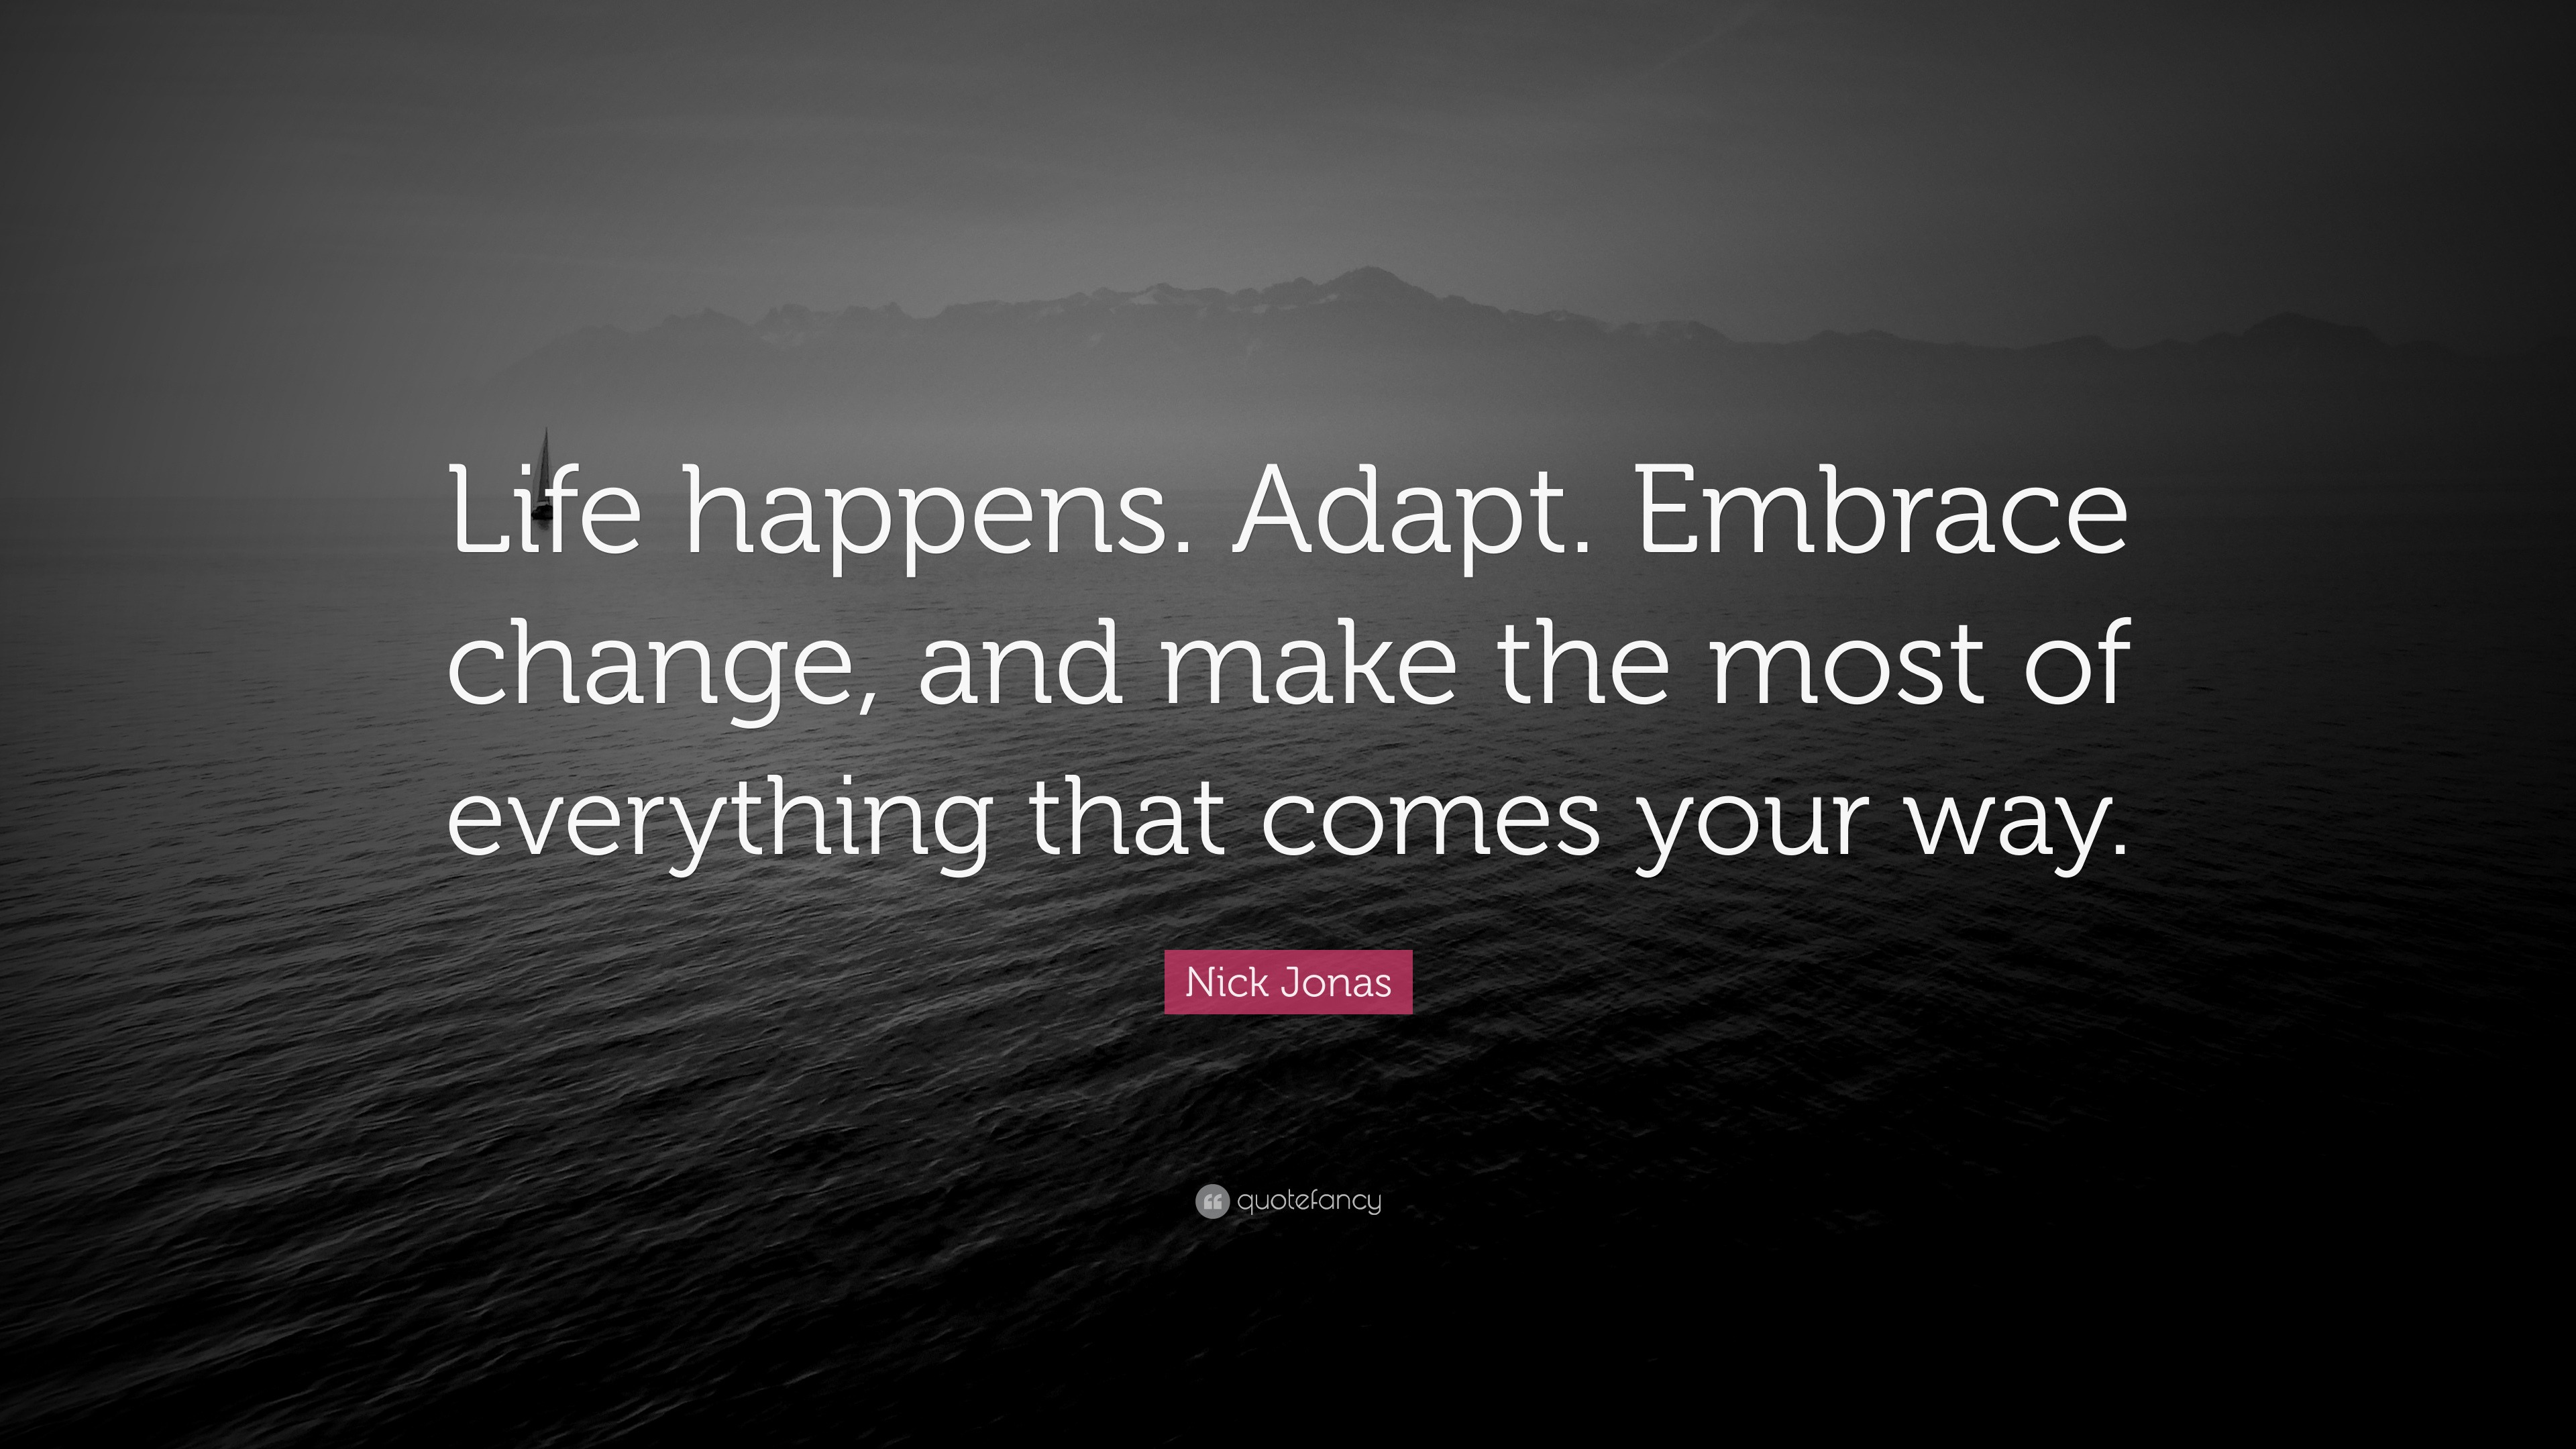 Nick Jonas Quote: “Life happens. Adapt. Embrace change, and make the ...